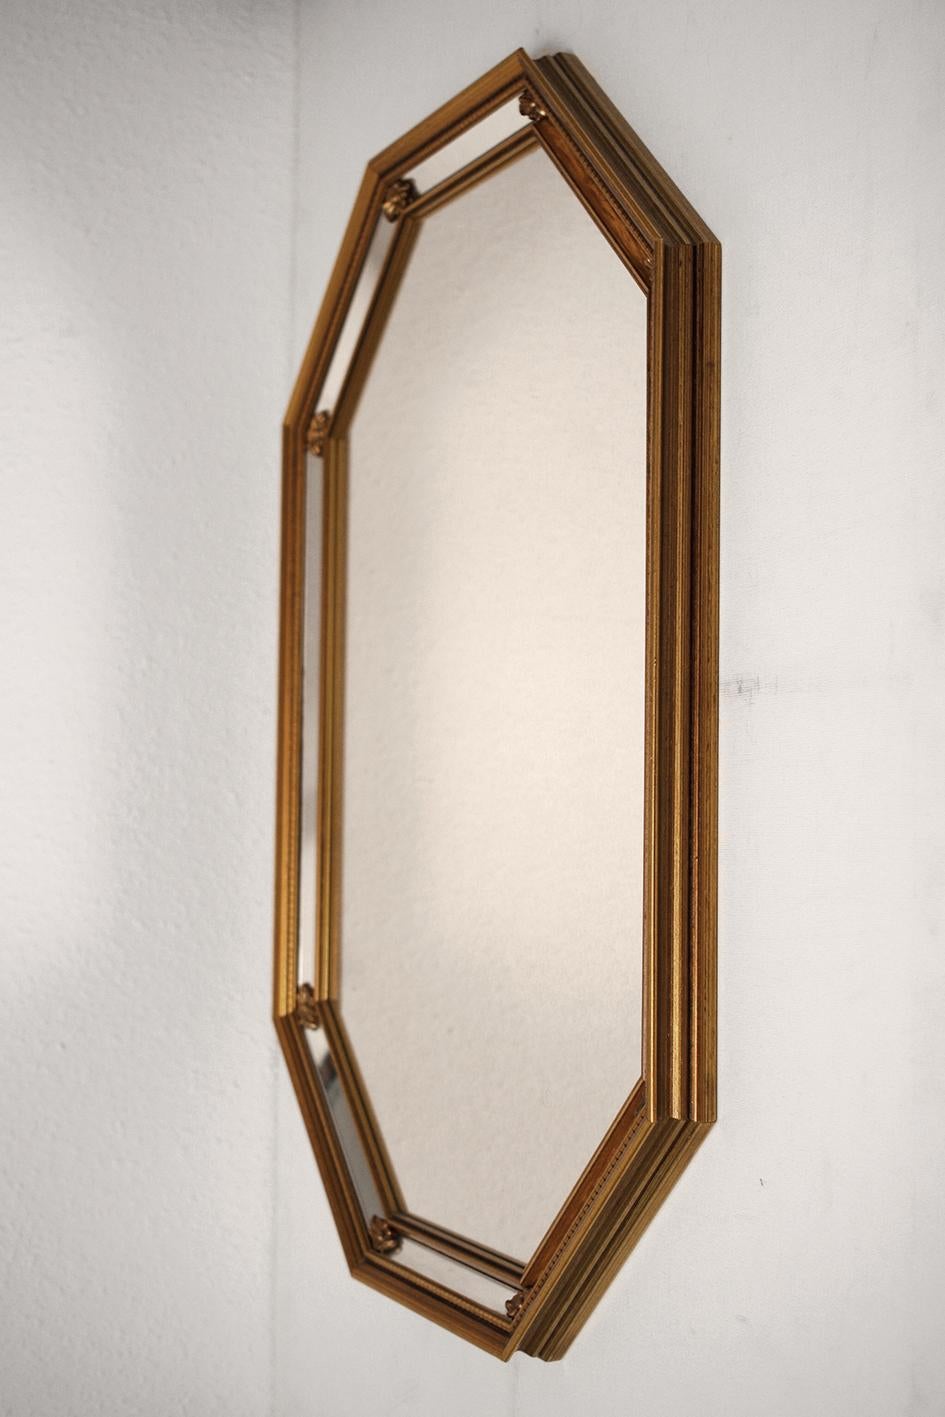 Hollywood Regency Beautiful Vintage French Regency Giltwood Wall Mirror, 1950s For Sale